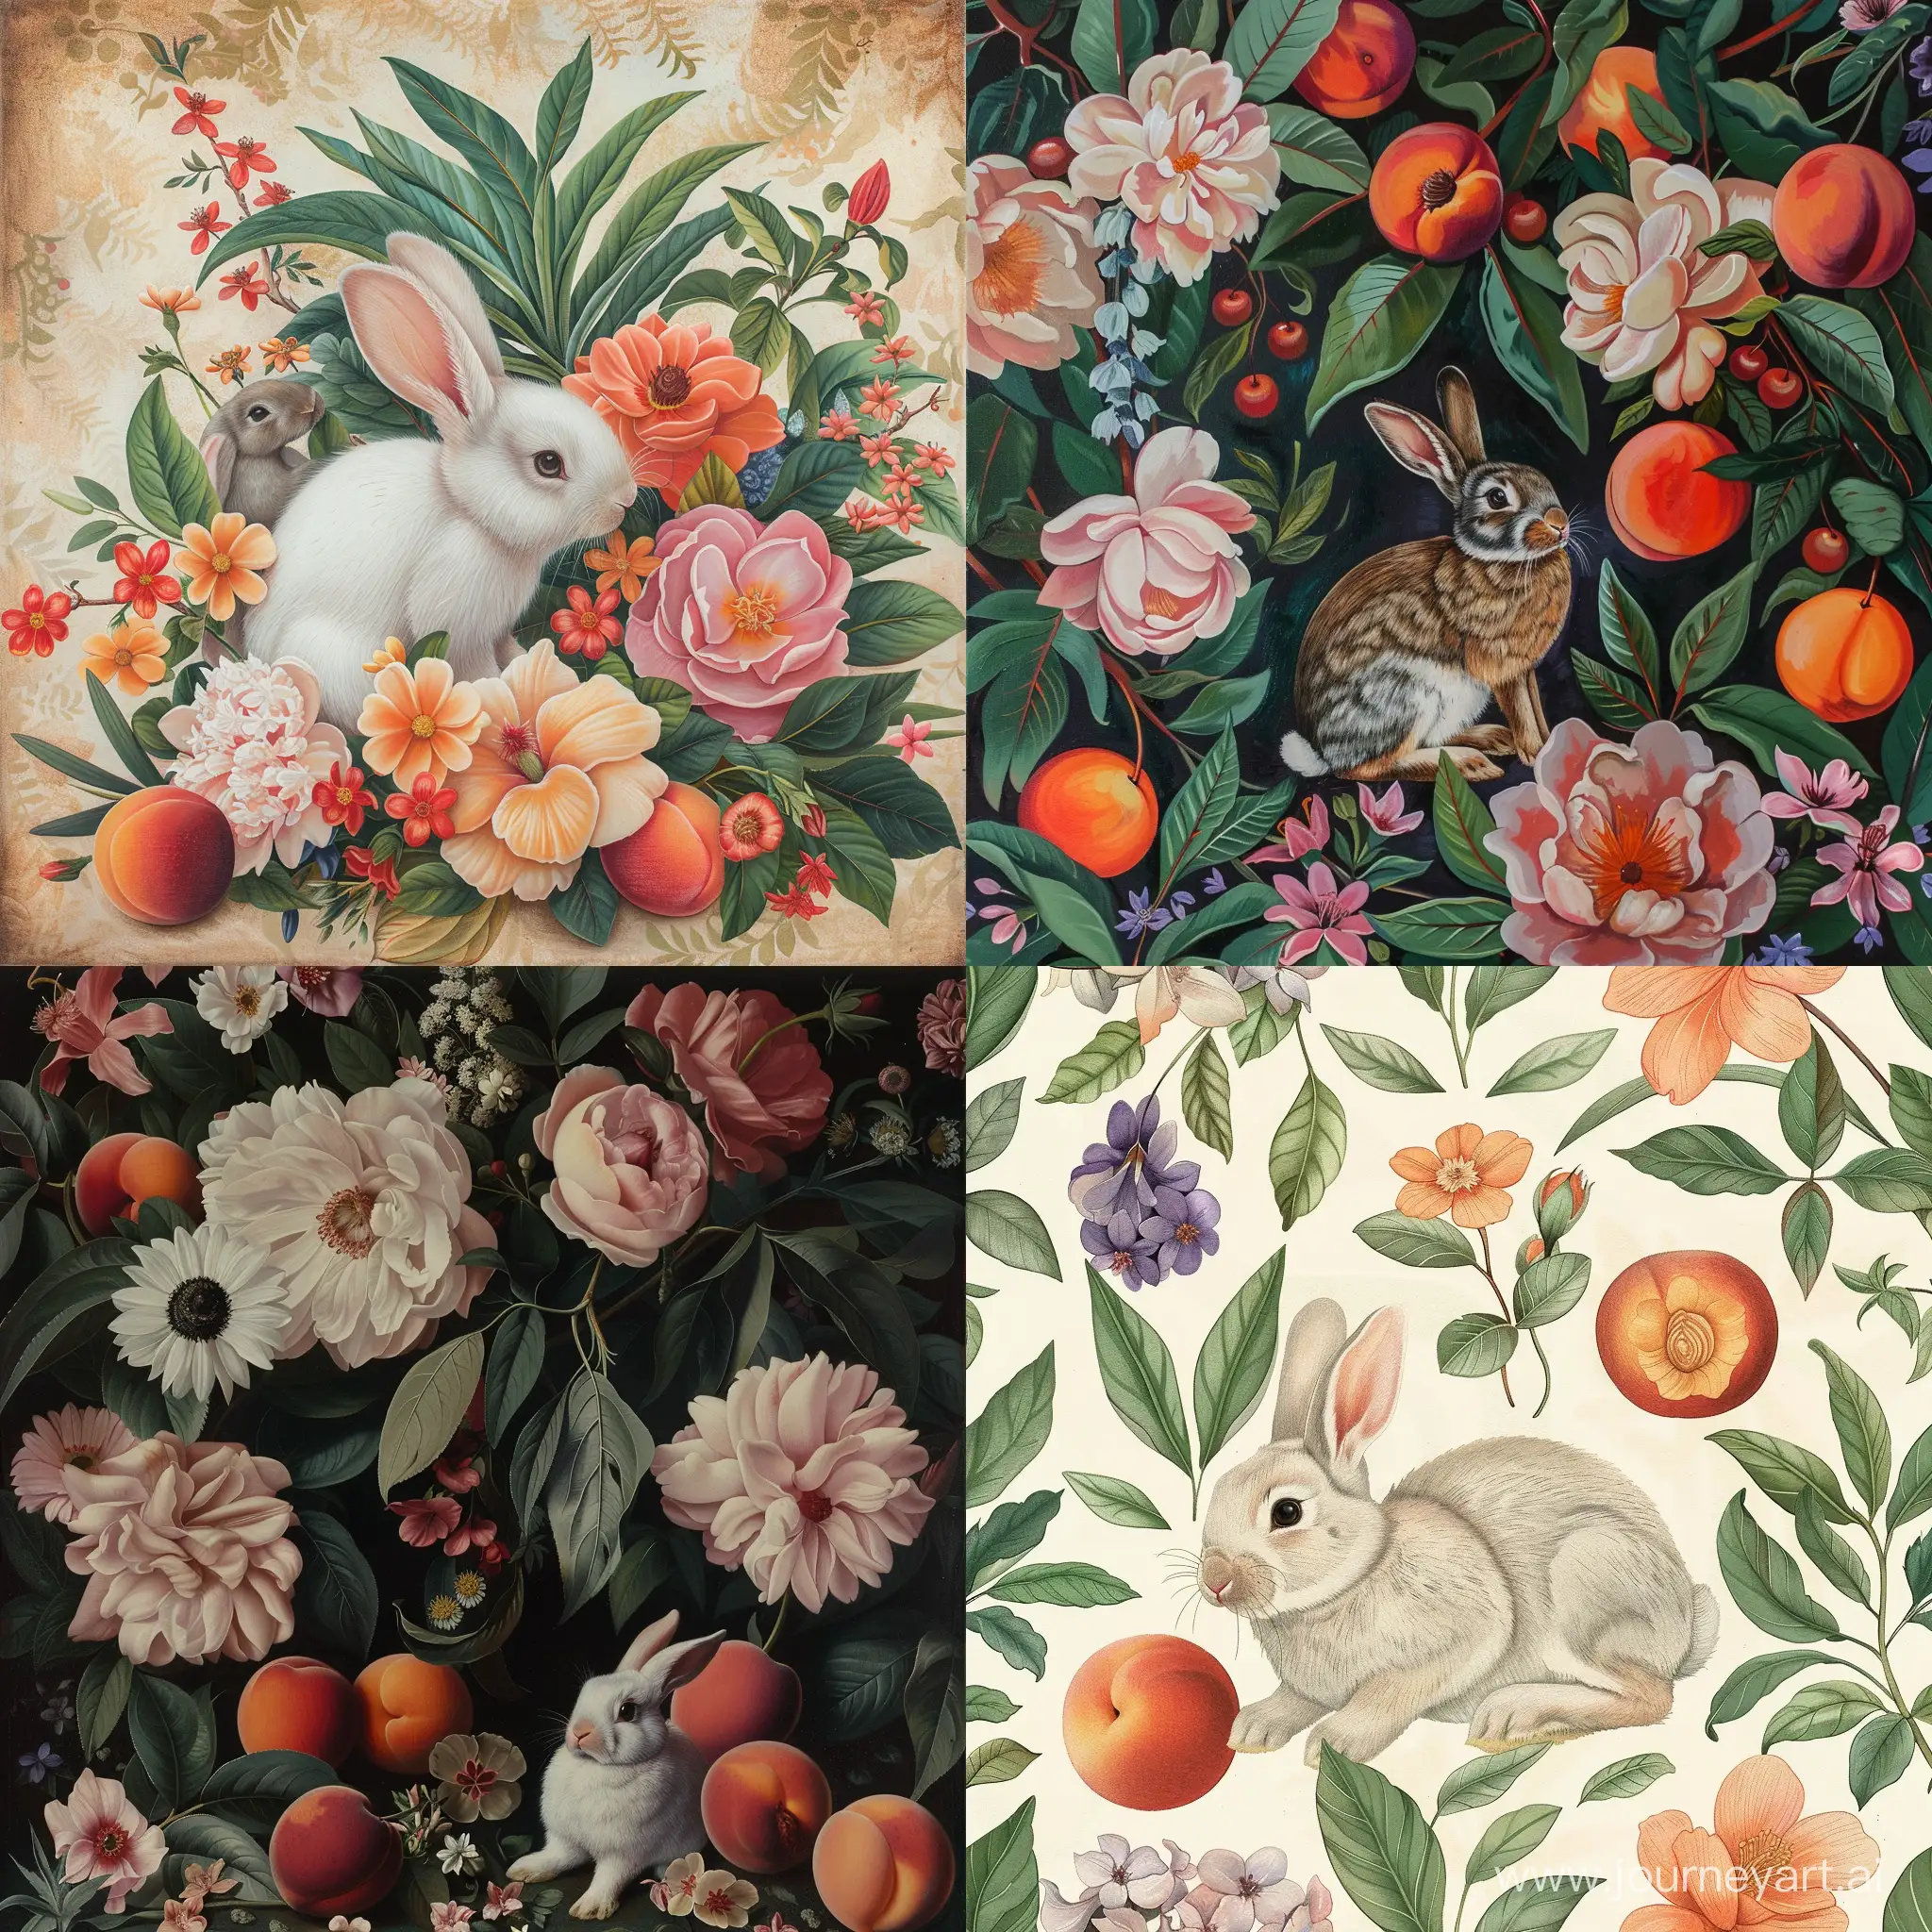 Rococo art style painting, flowers, peaches, leaves, bunny